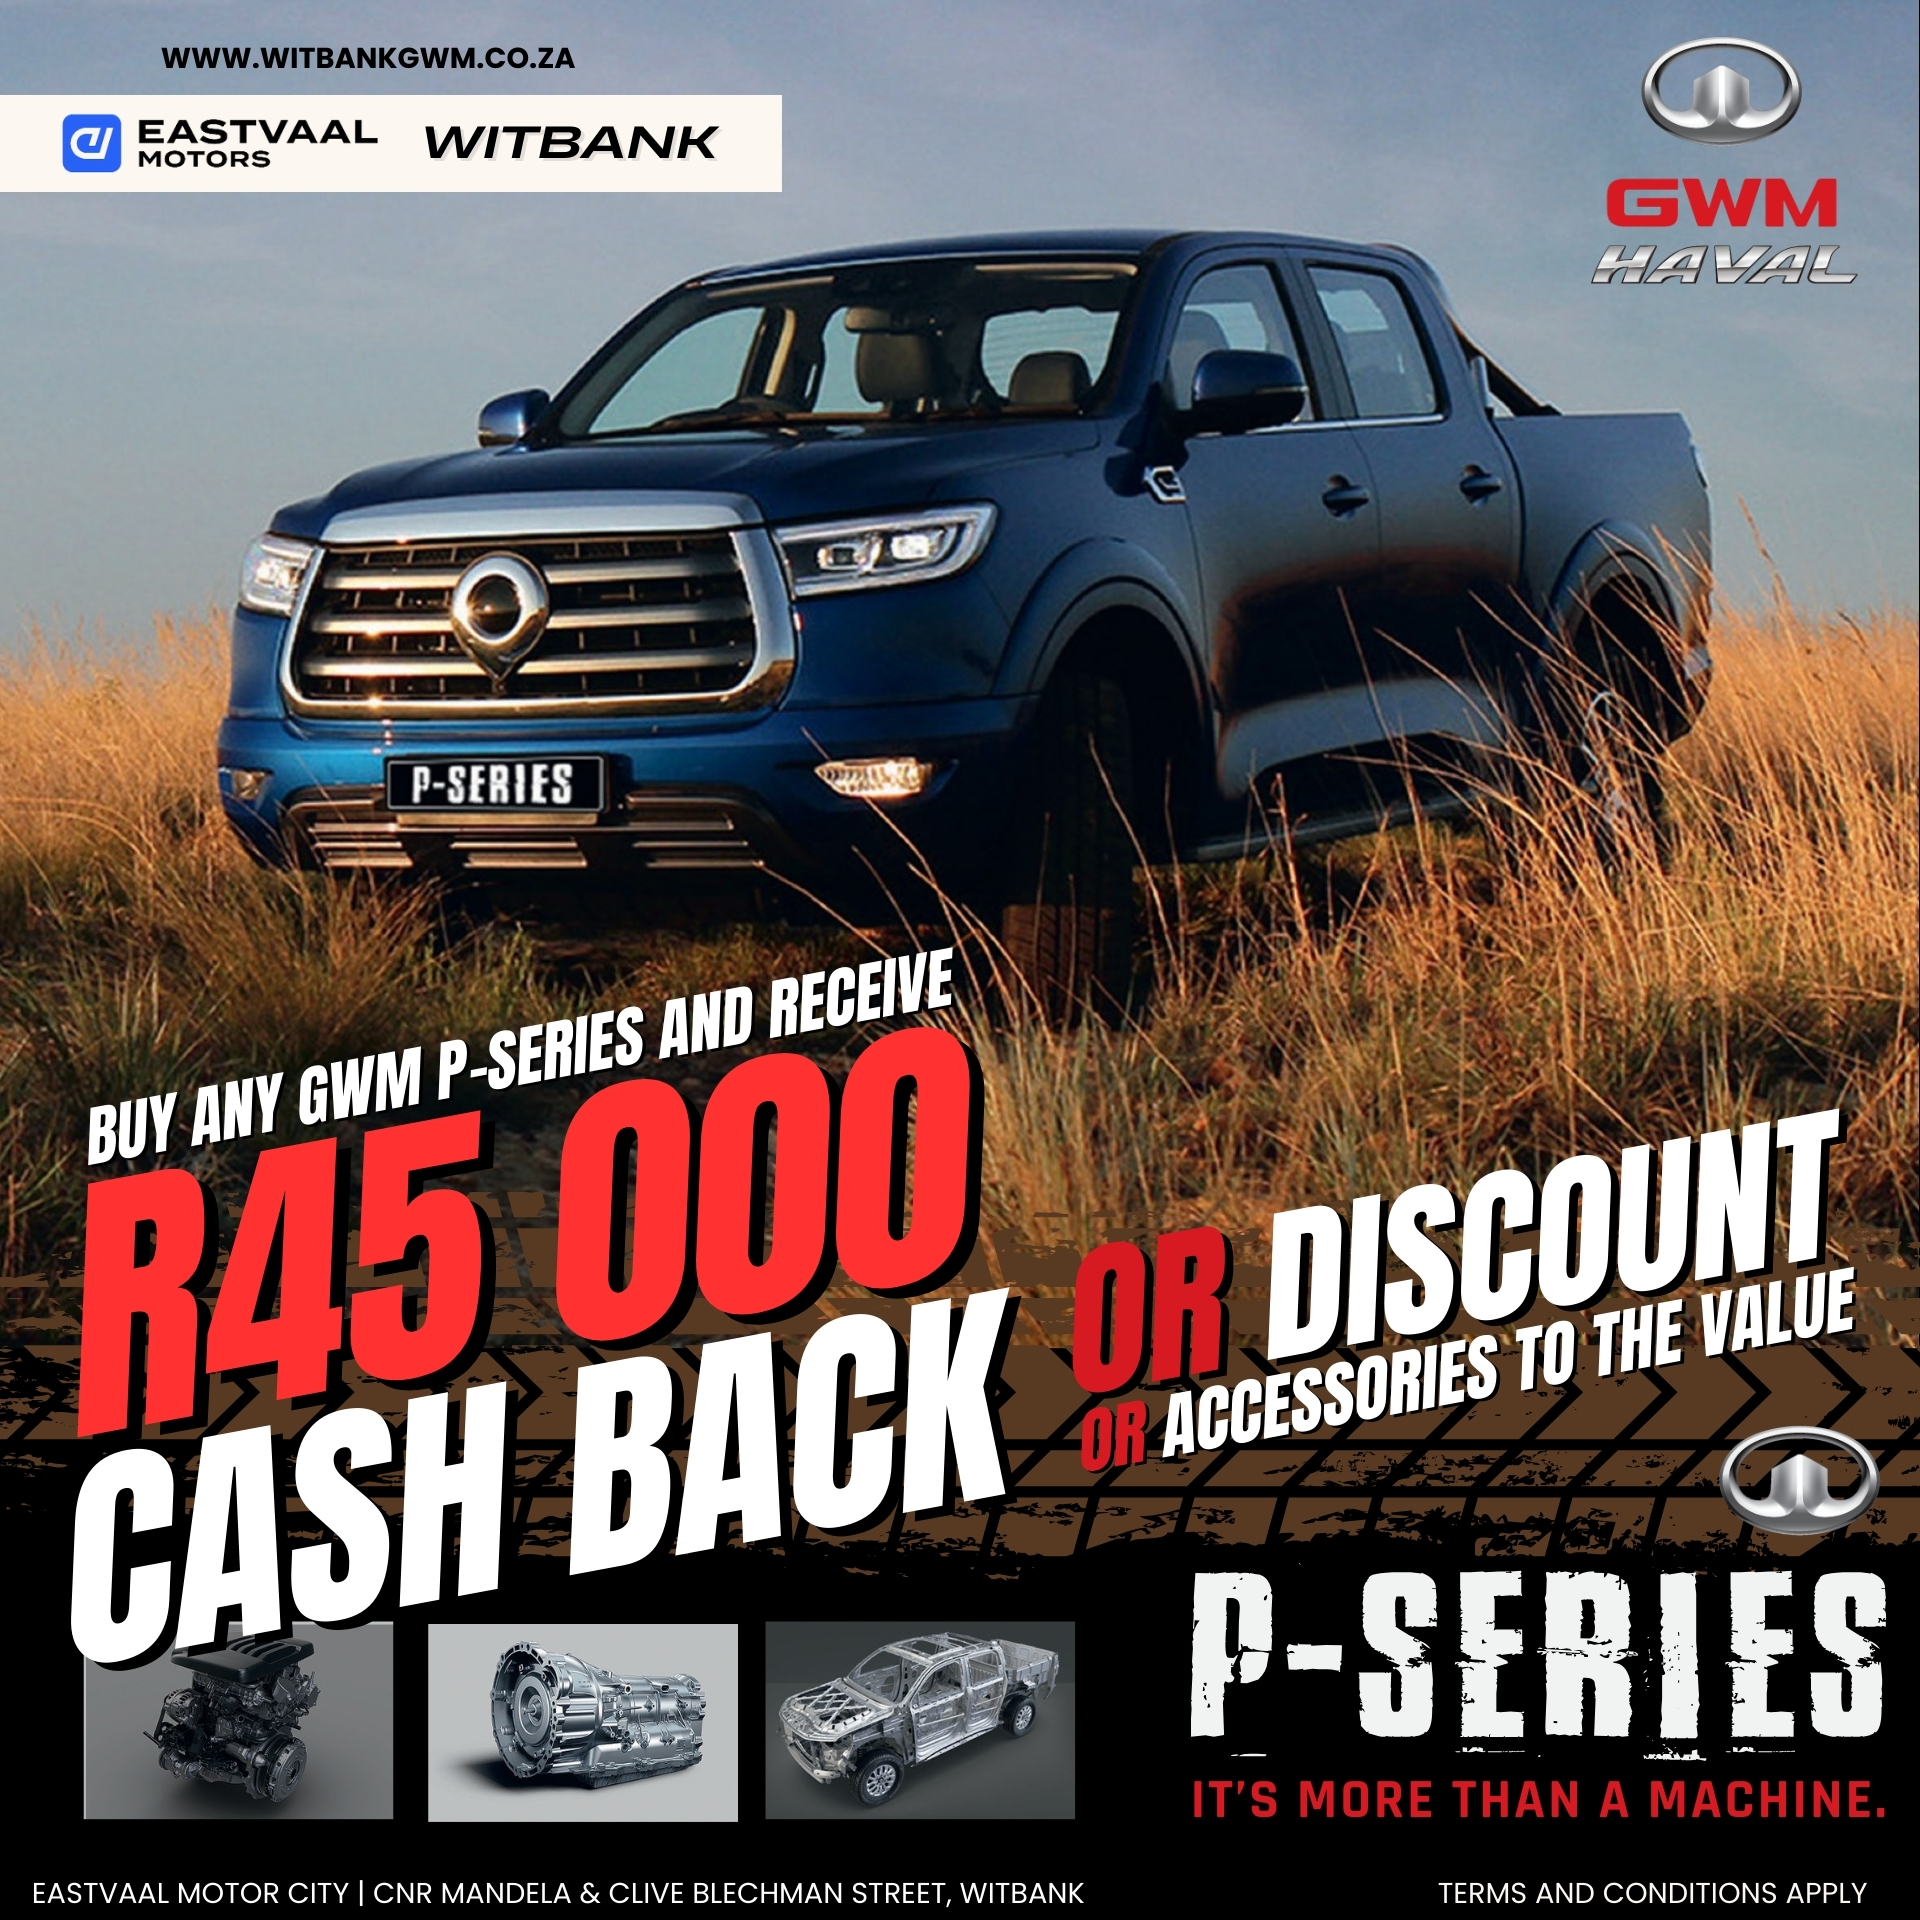 Buy Any GWM P-Series This April image from 